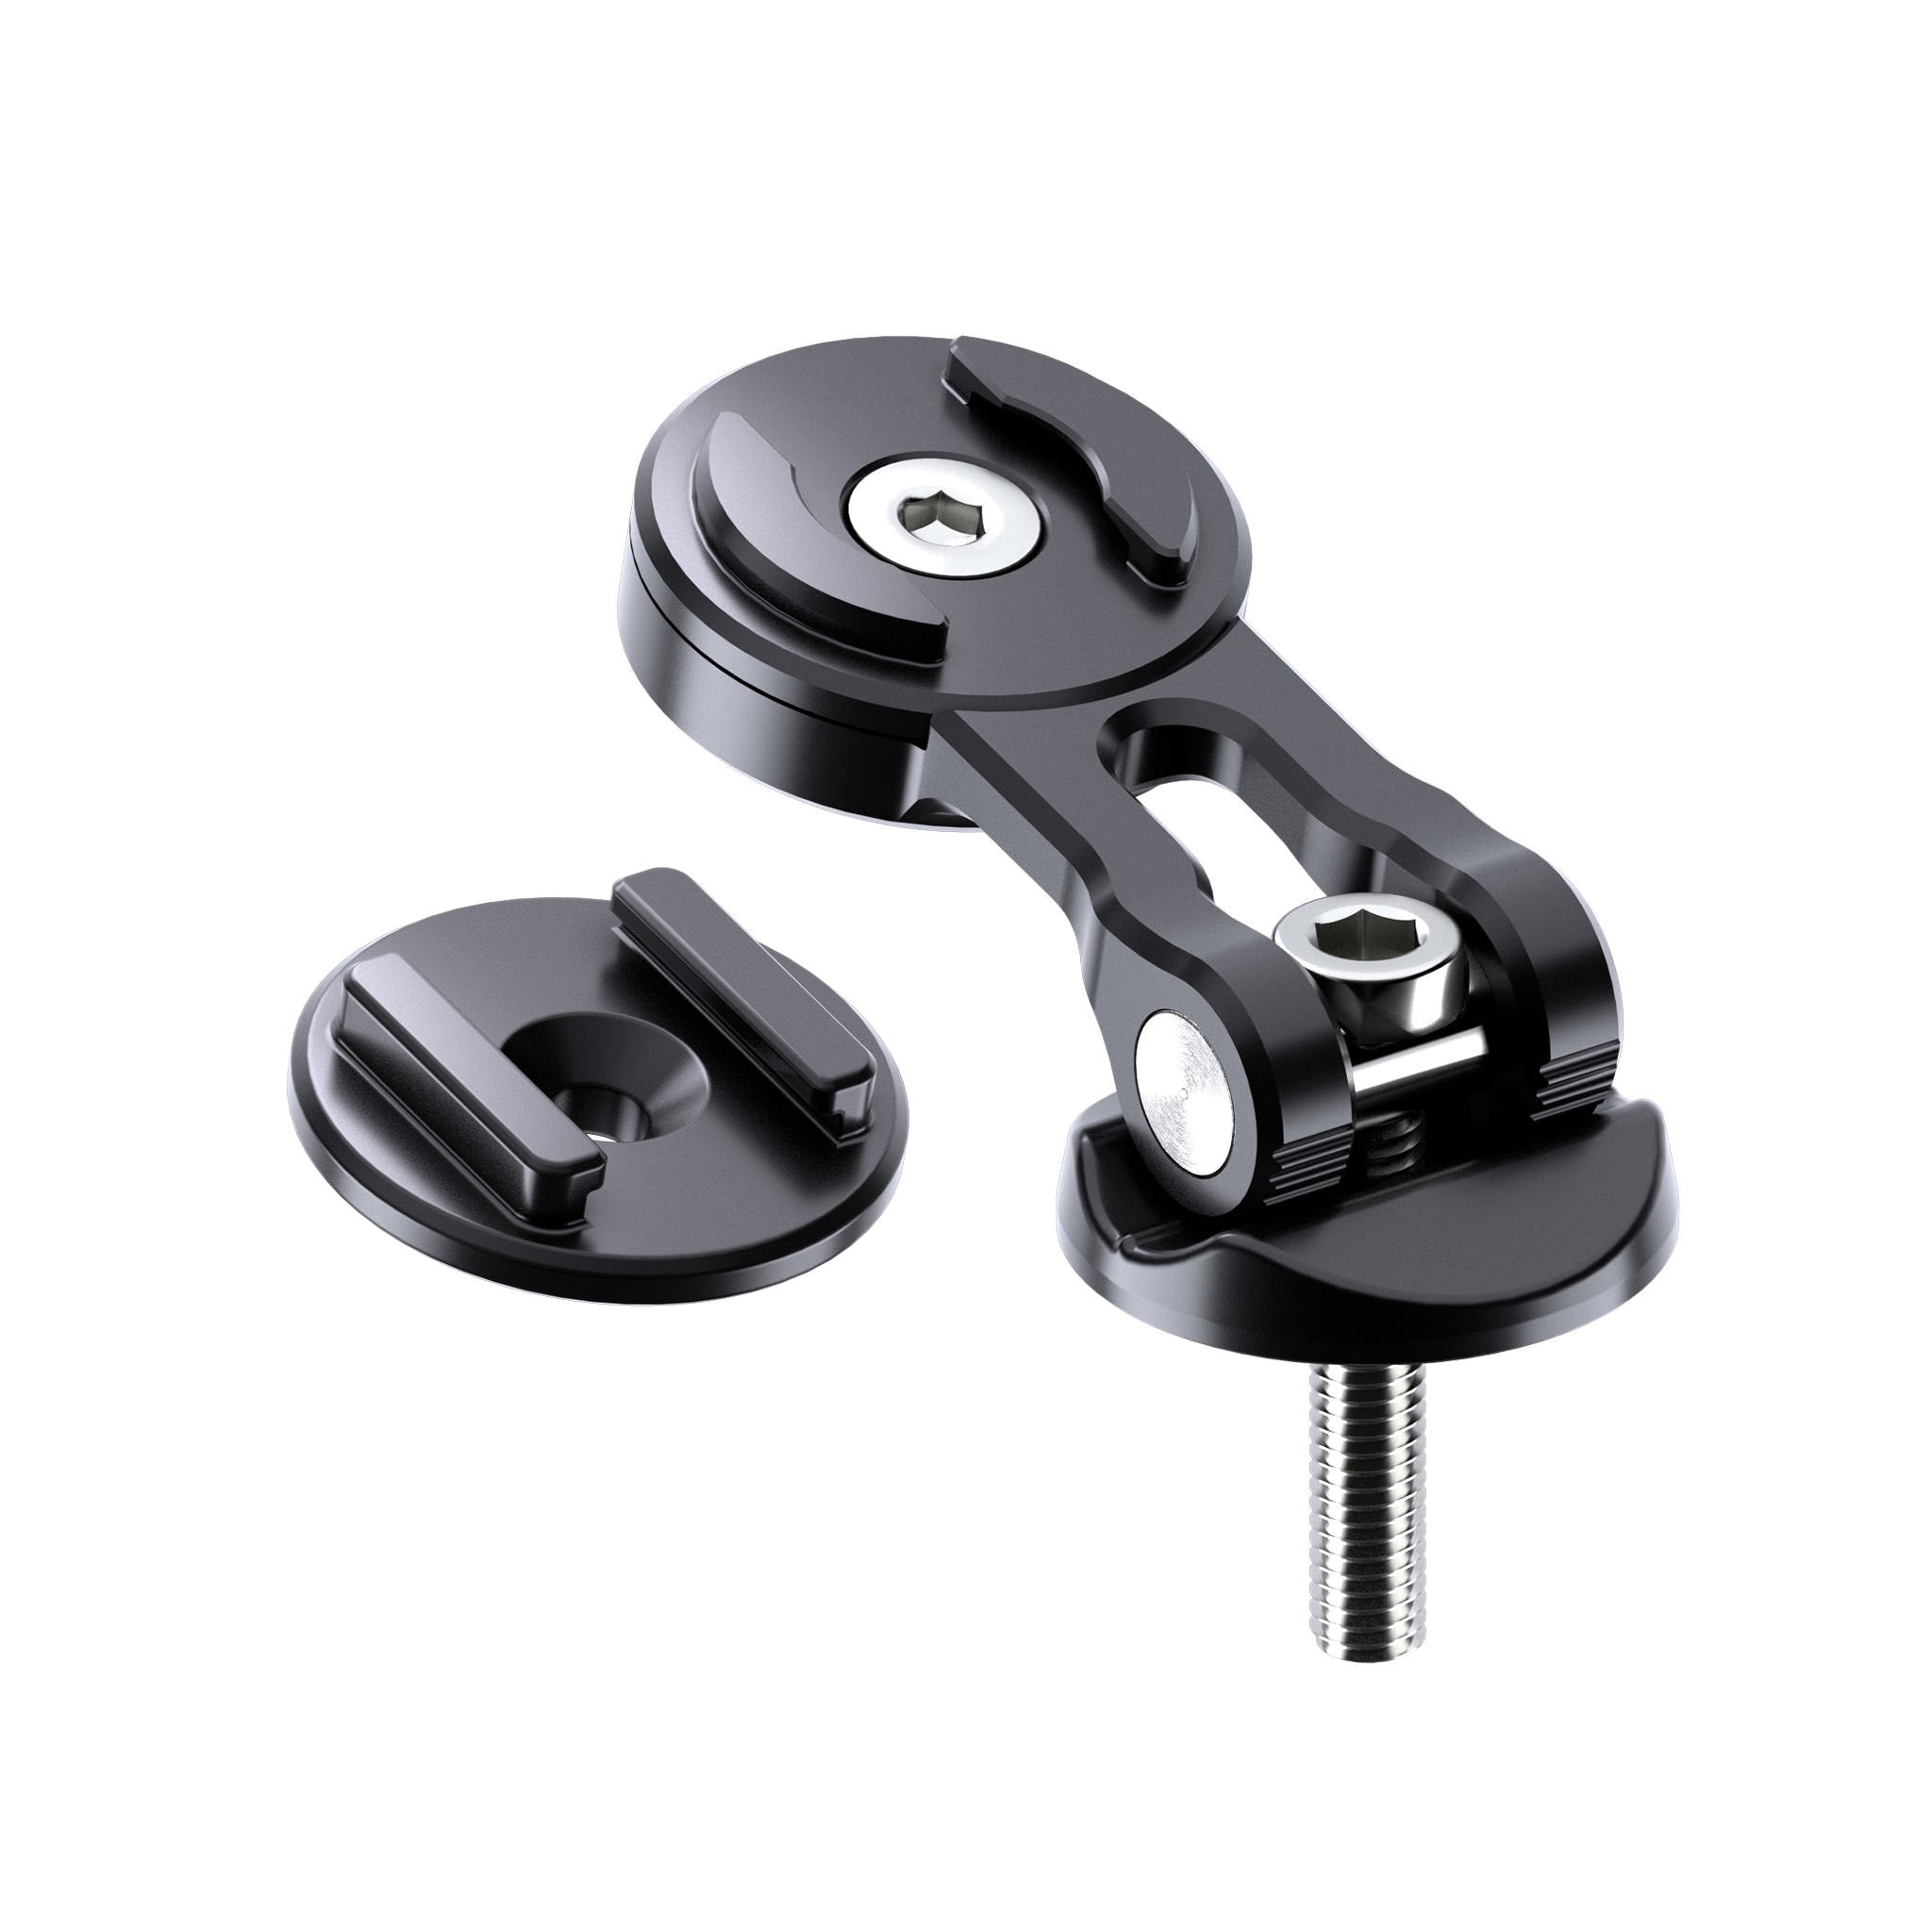 SP CONNECT Moto Stem Mount - Universal attachments for motorcycles